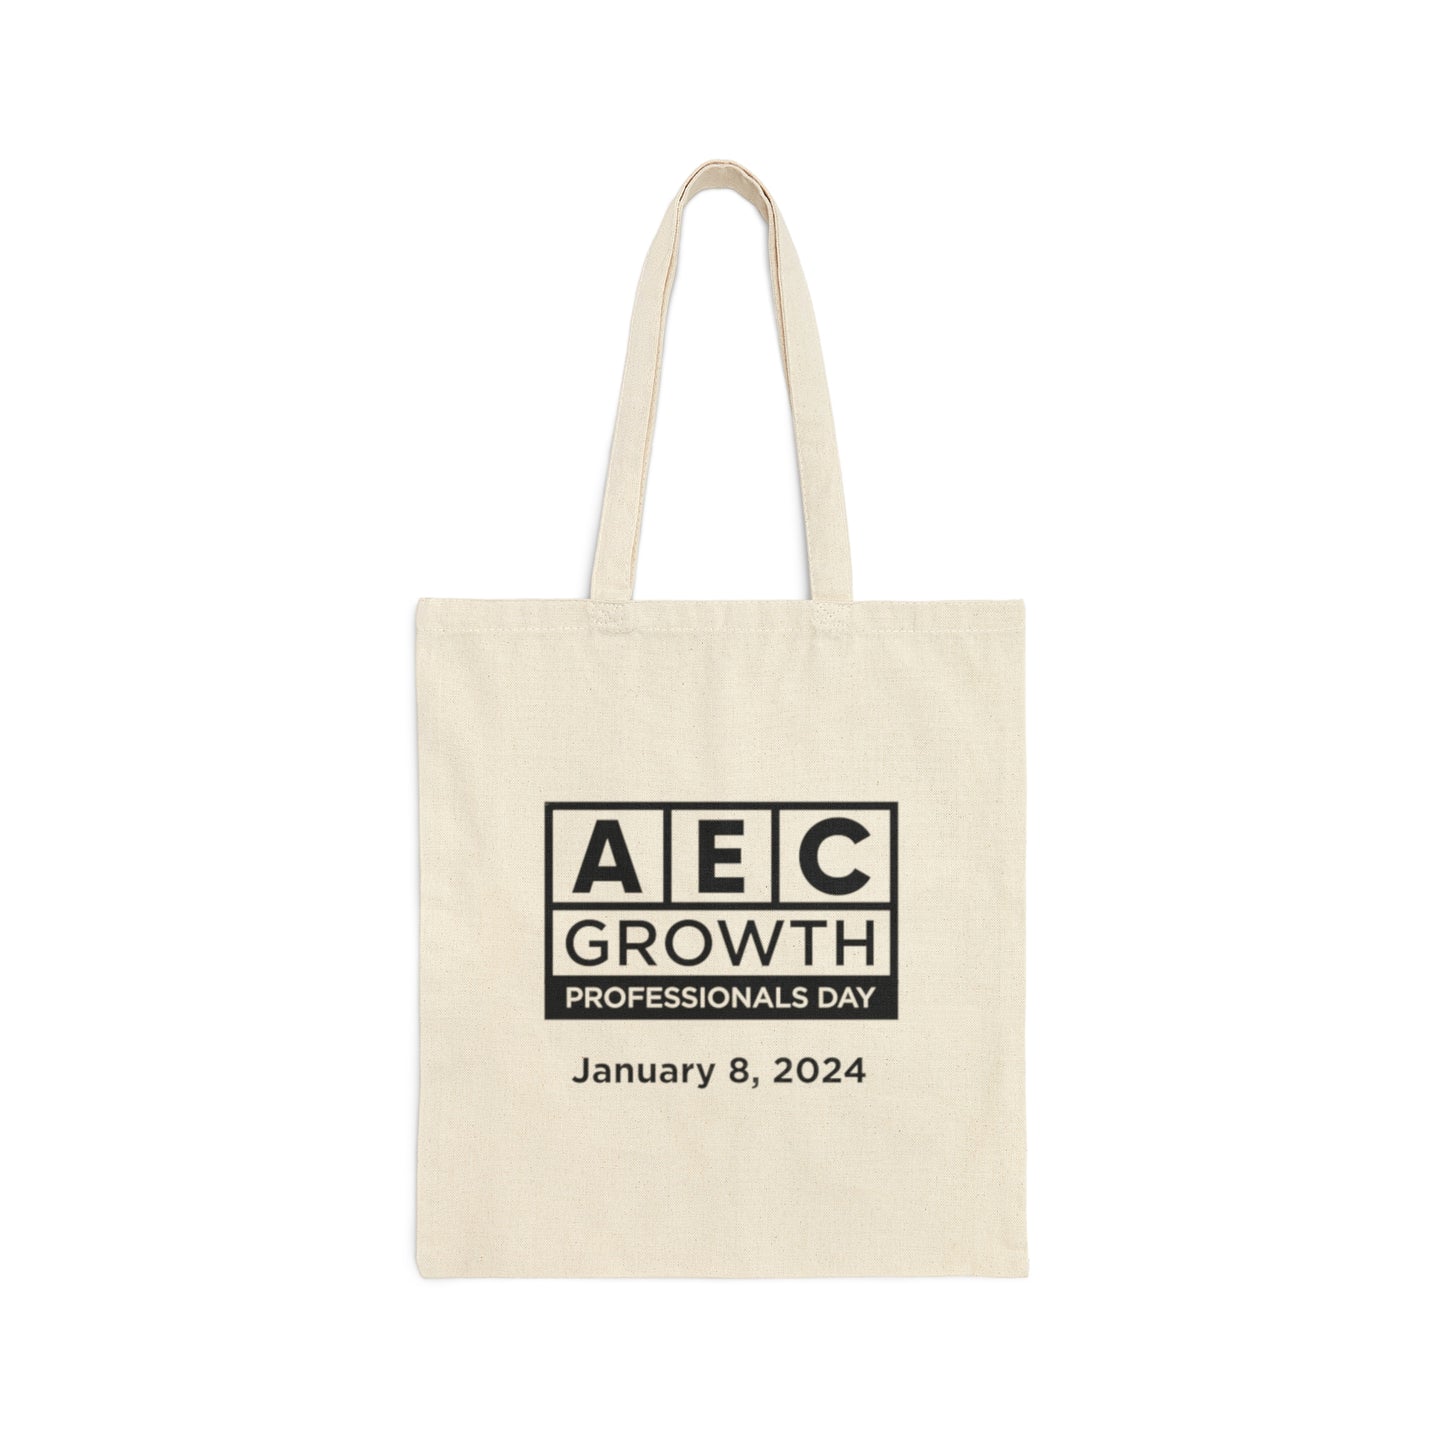 AEC Growth Professionals Day Cotton Tote Bag - Black